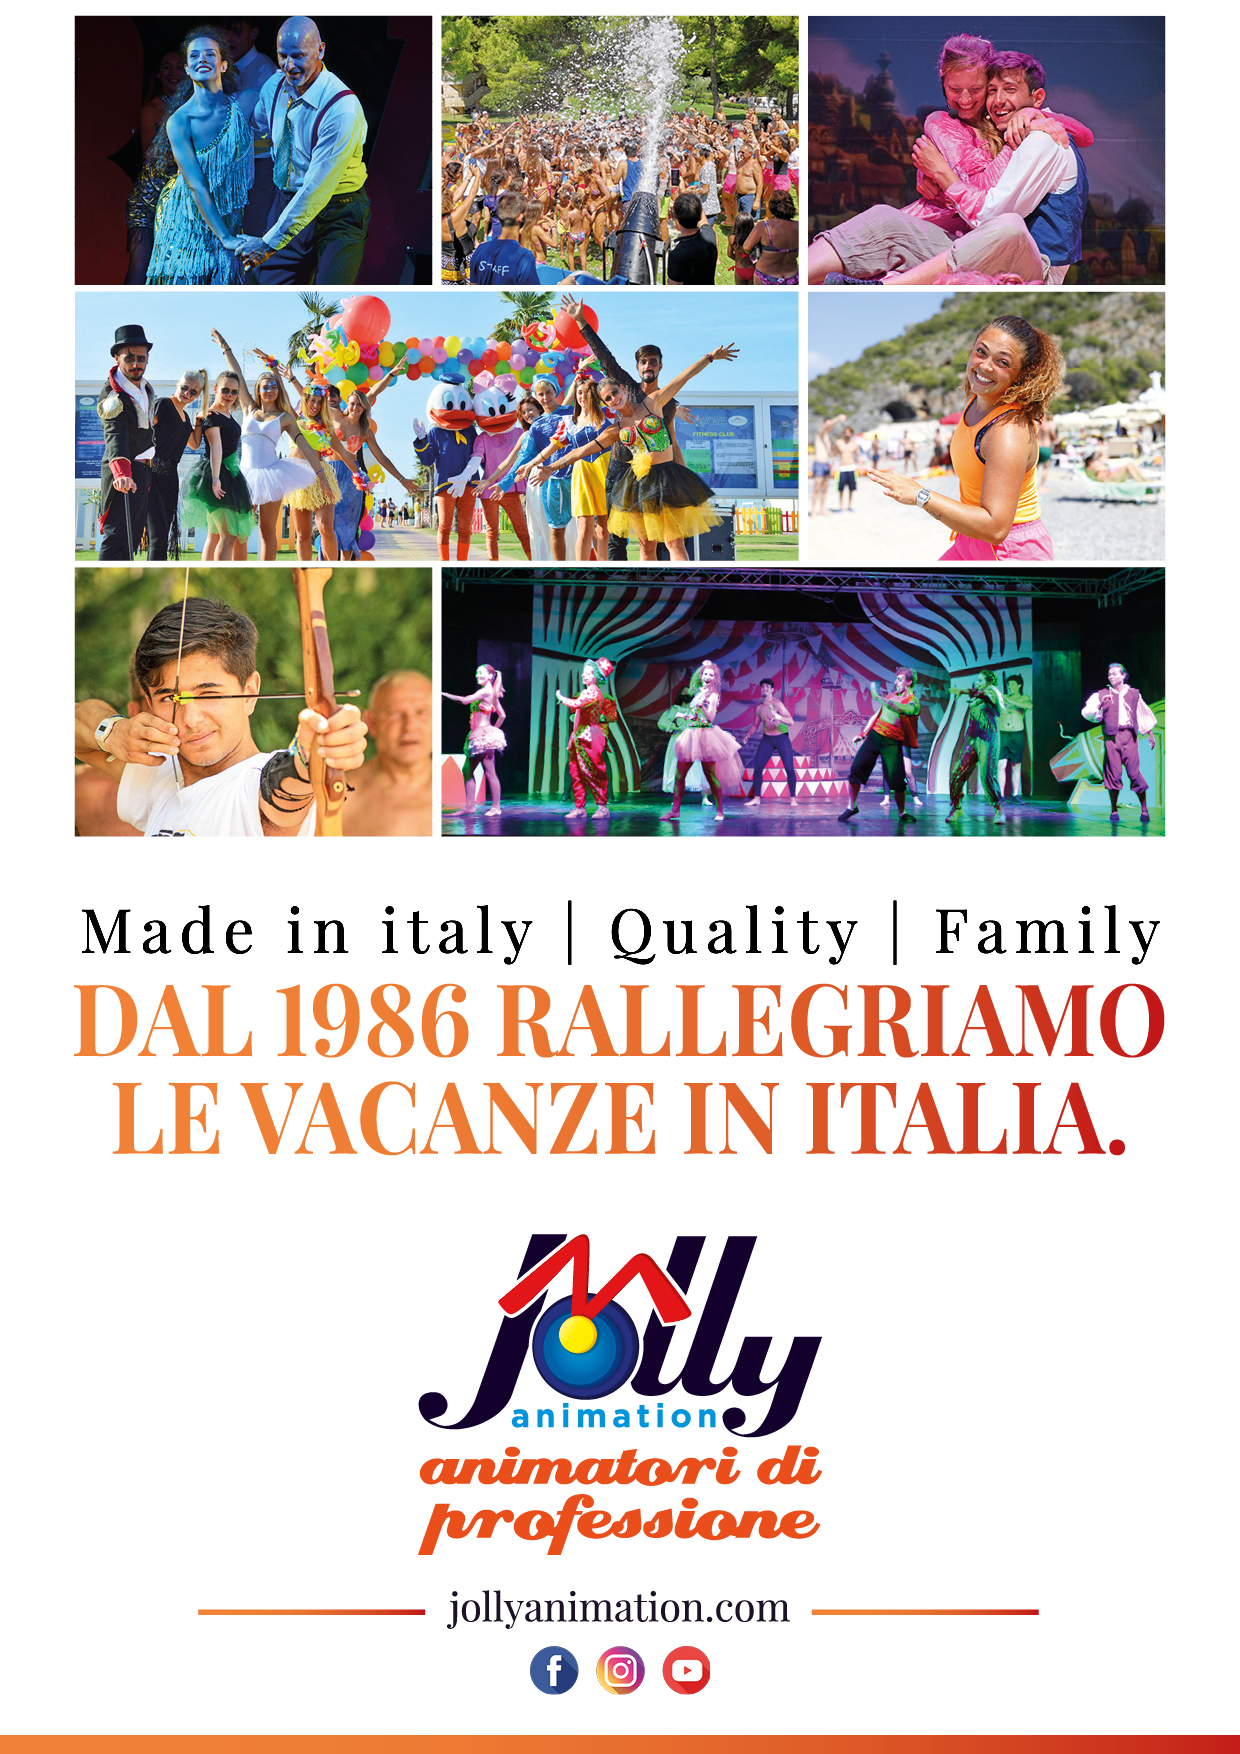 Quality, Family, Made in Italy